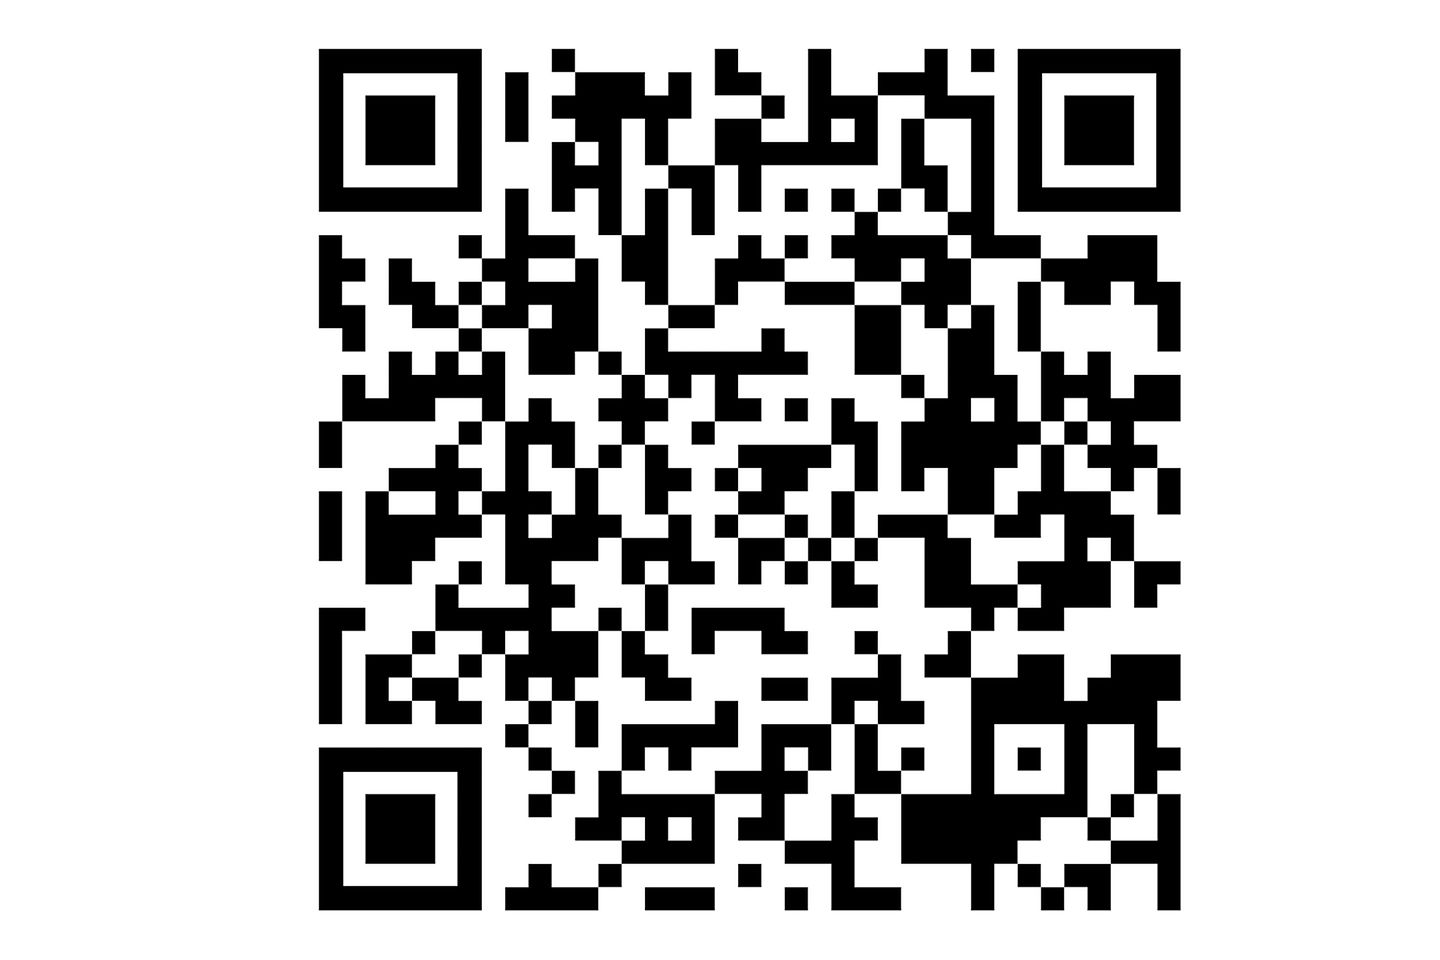 09e-buderus-app-prolibrary-android-qr-code